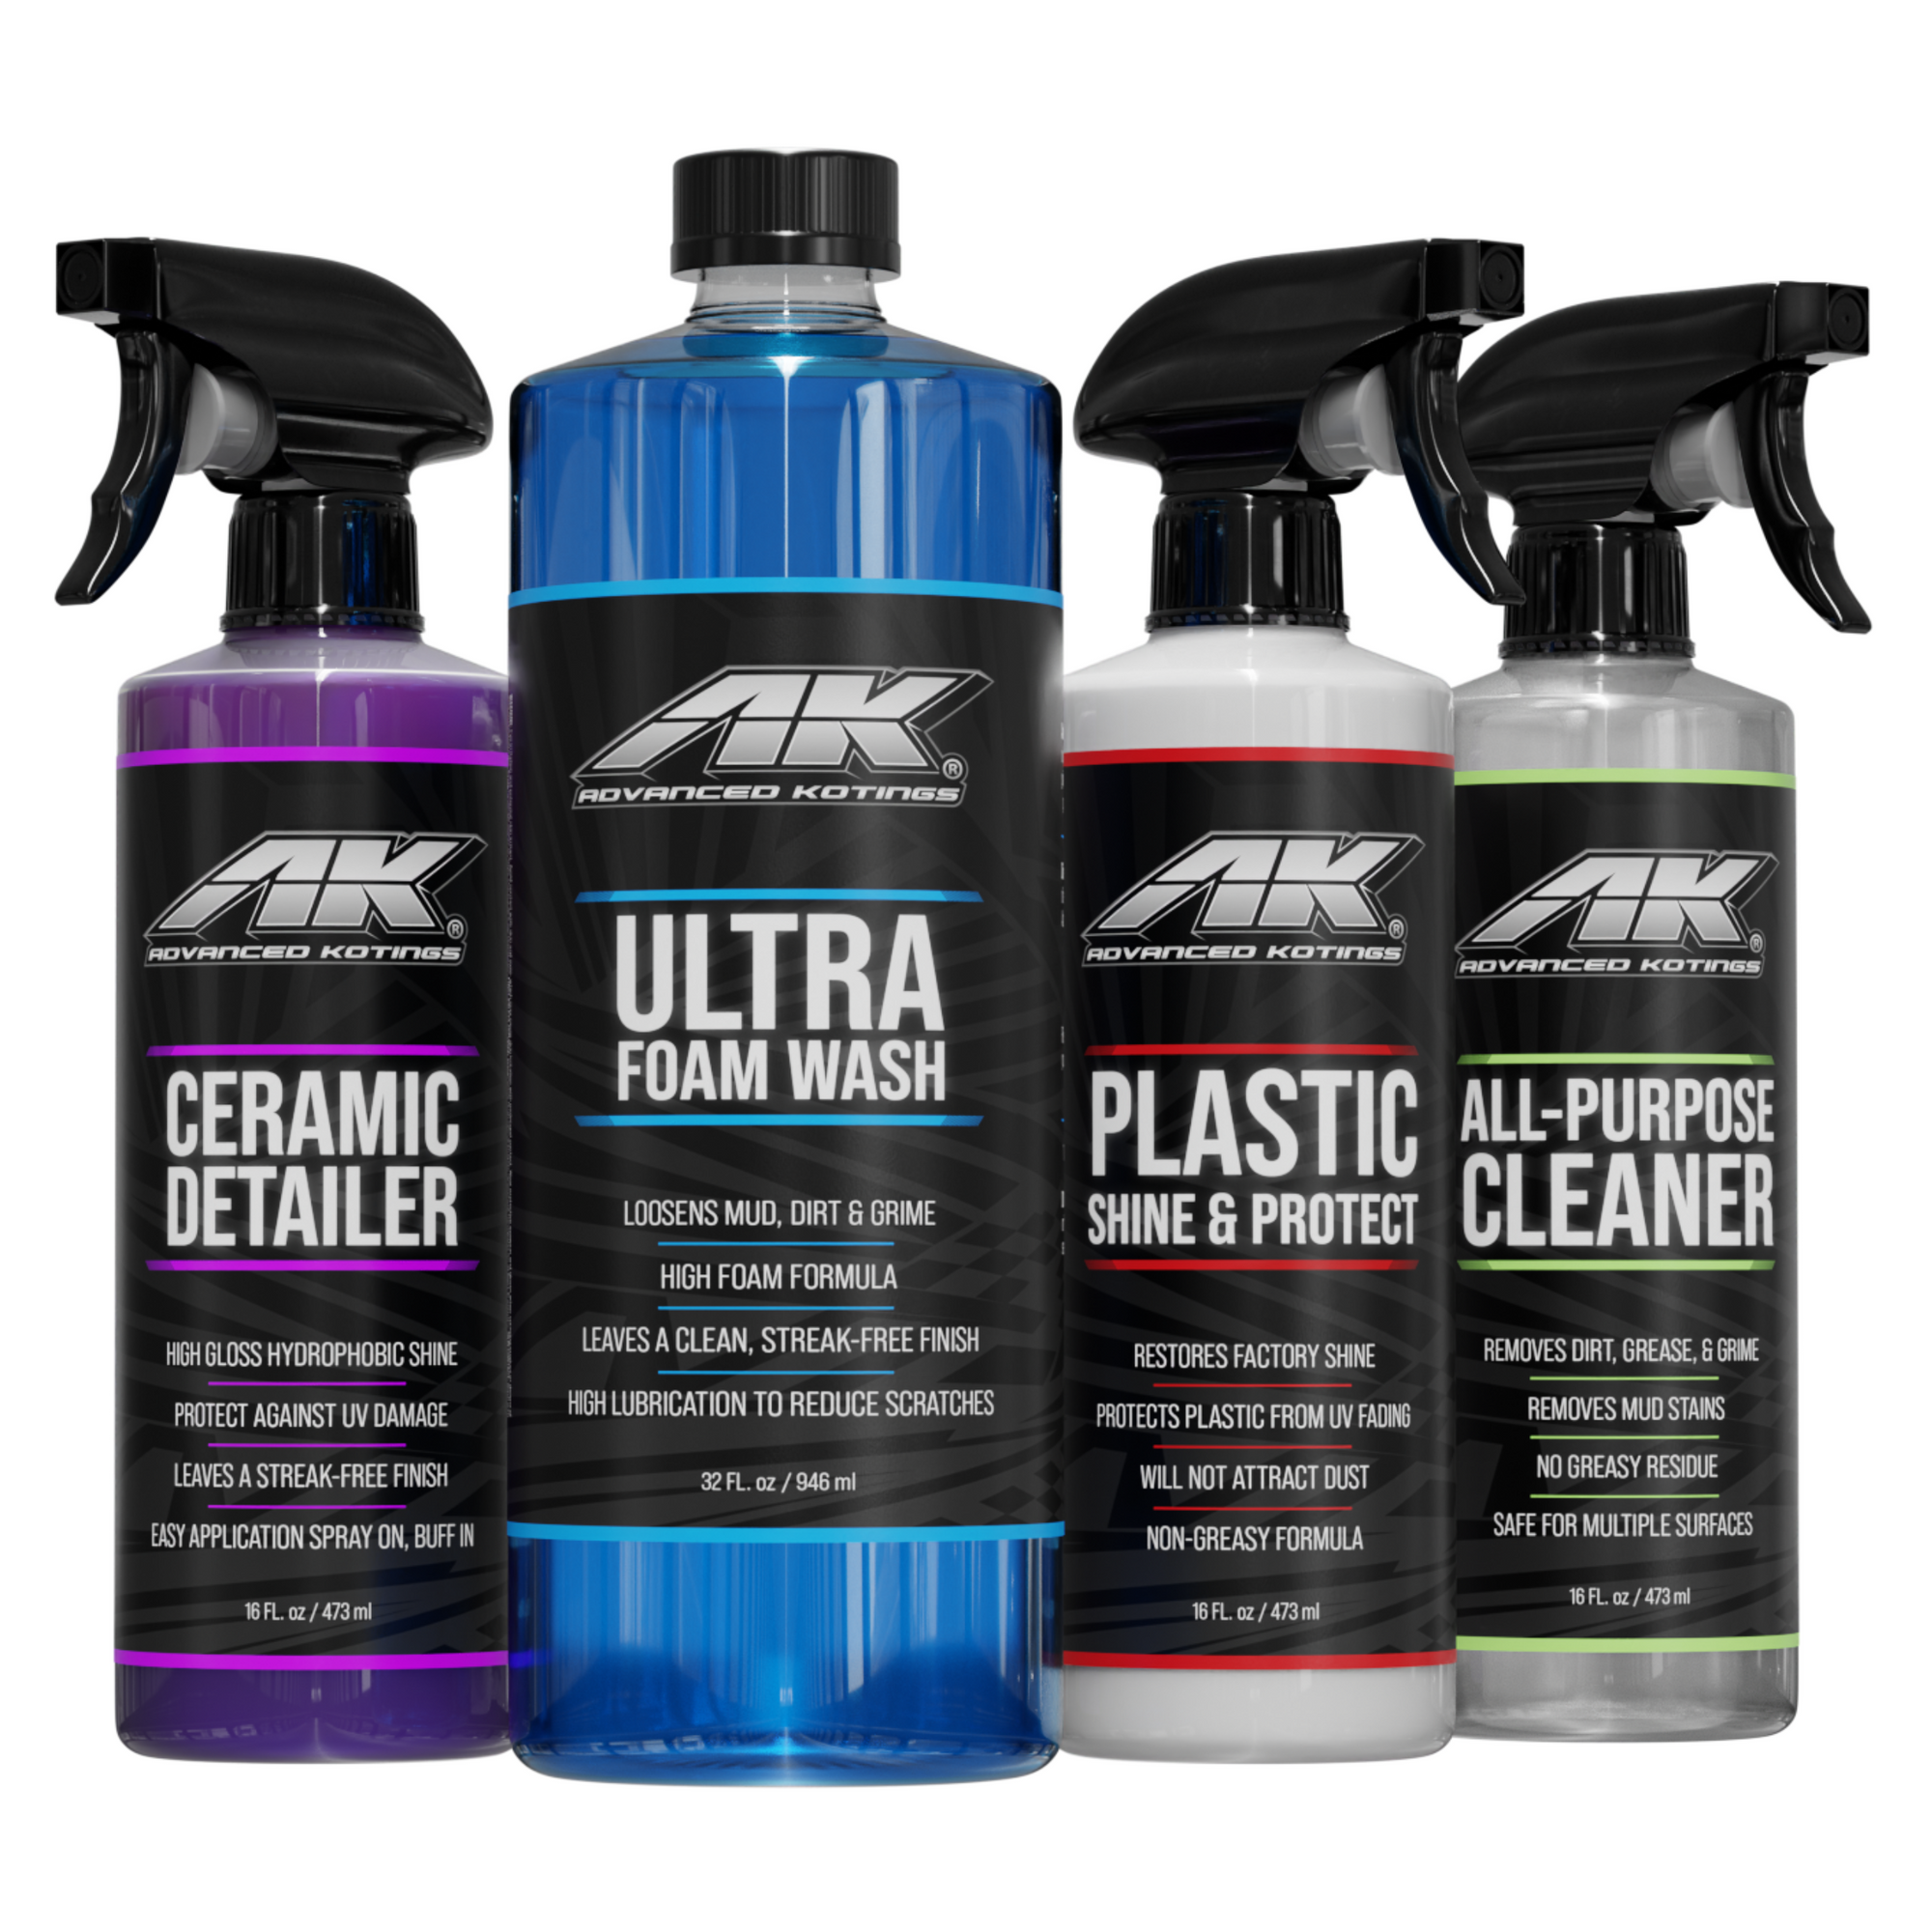 Advanced Kotings Street Bundle Cleaning and protection for car, truck, and Trailer